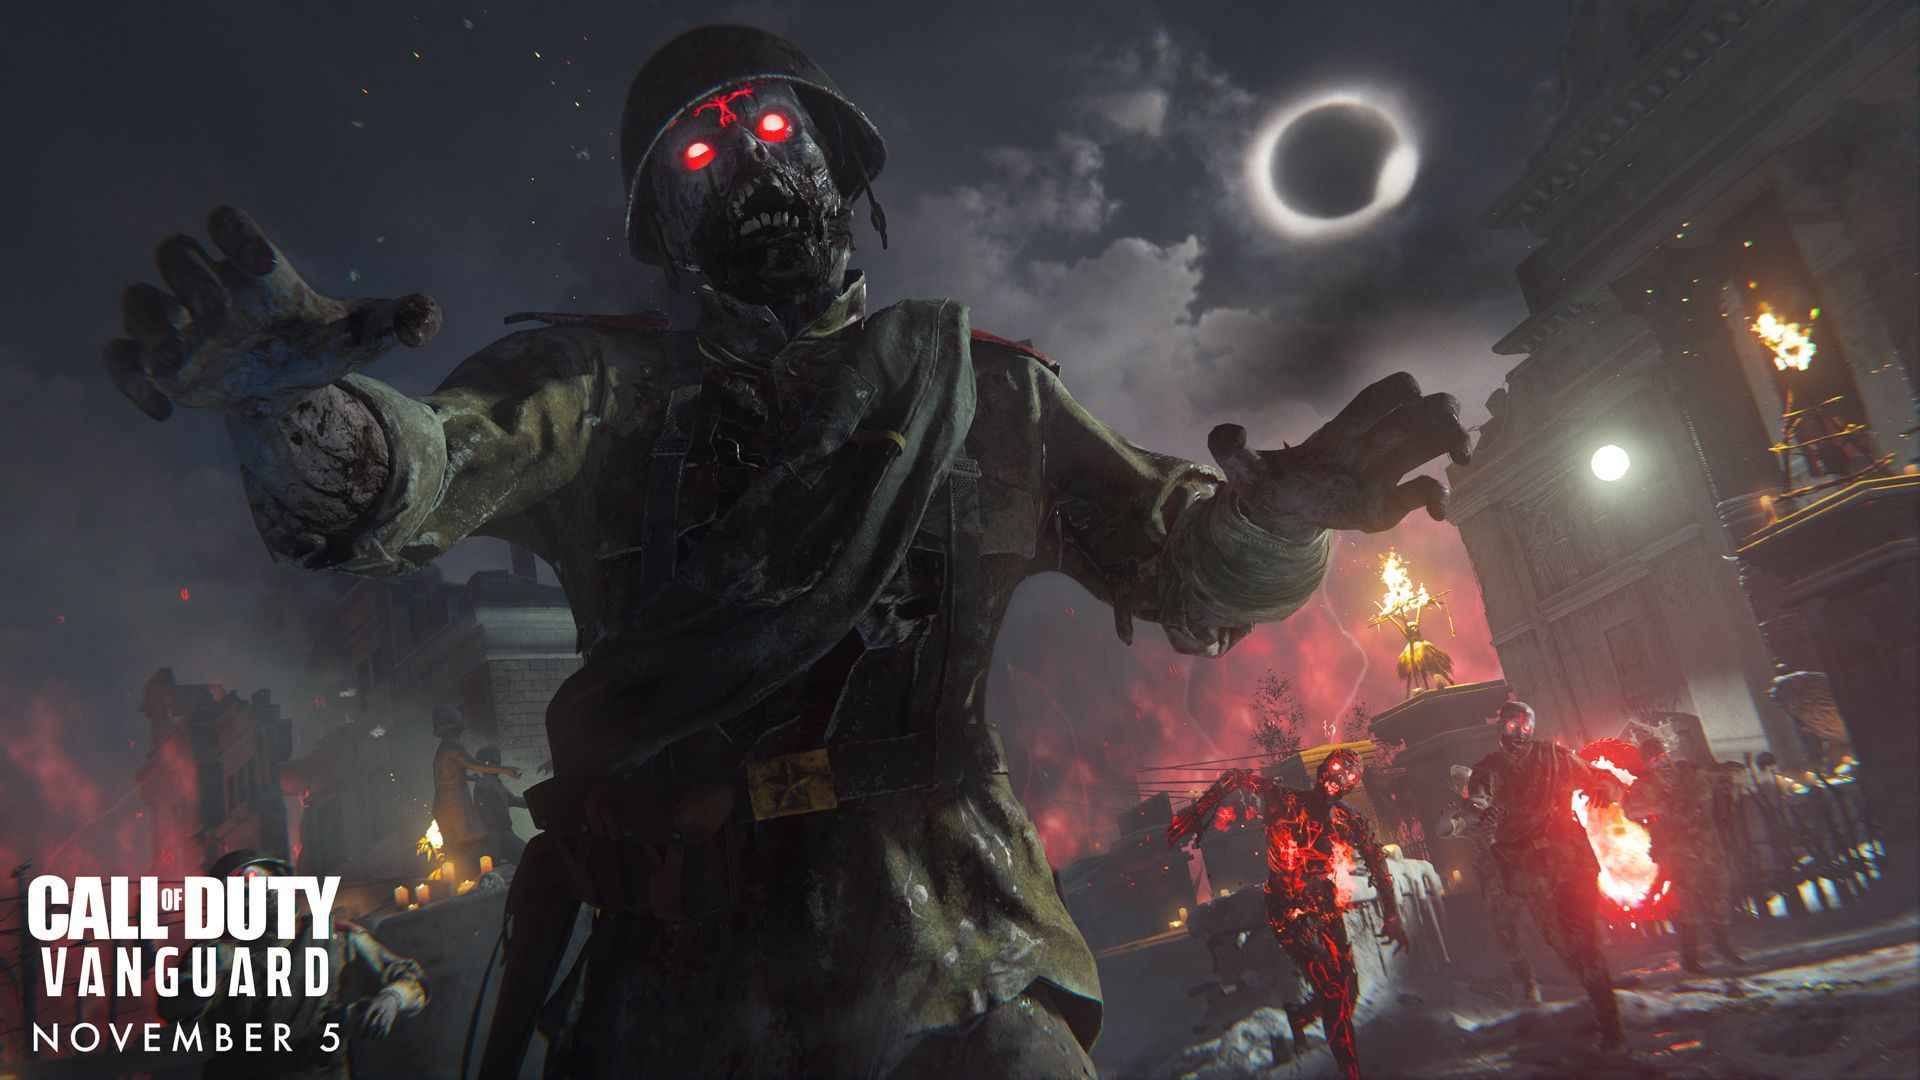 Call of Duty Vanguard Season 2 patch notes and gameplay trailer released